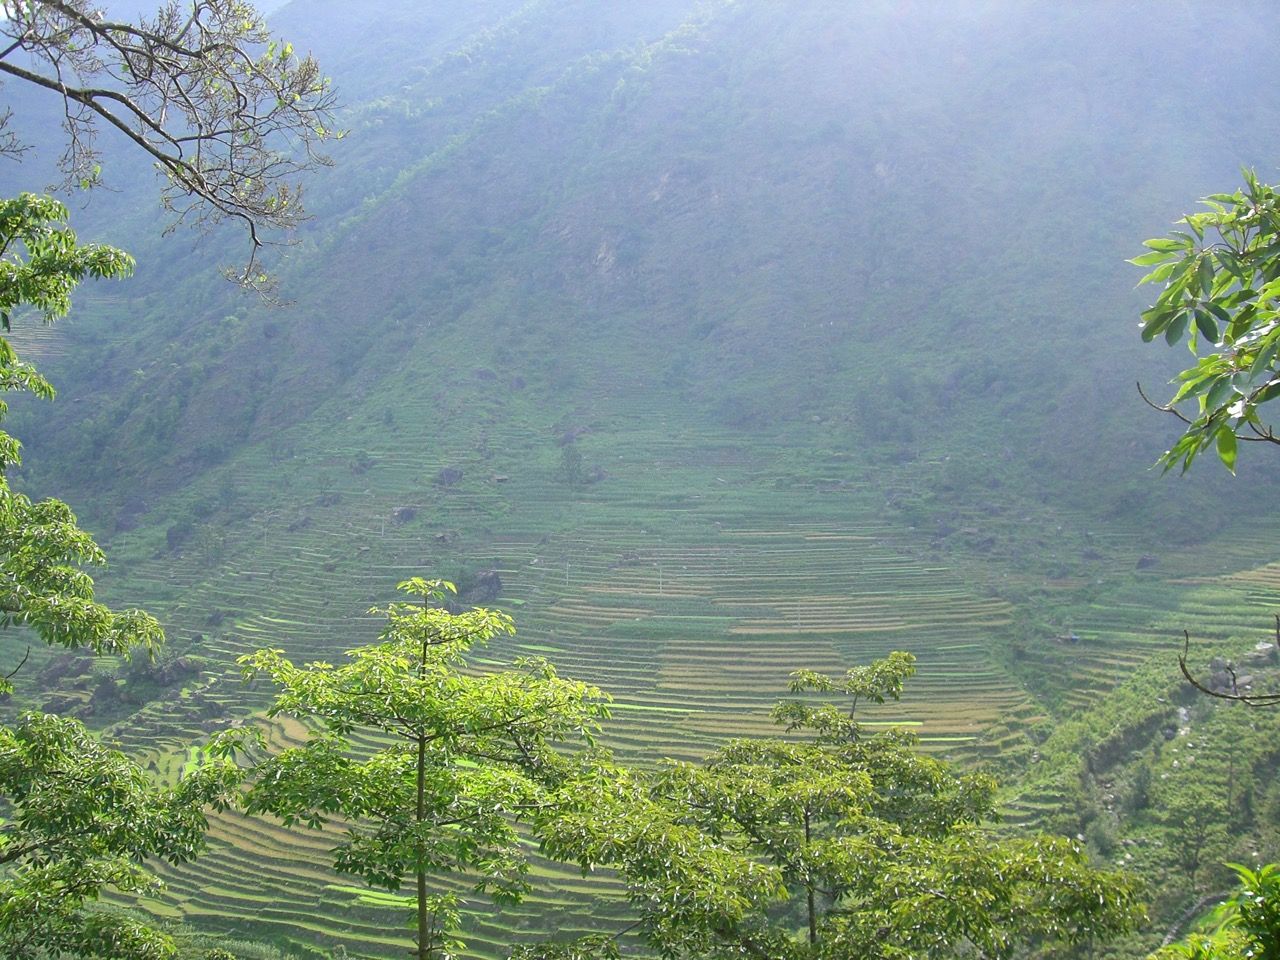 Crop terraces outside Panggom. Photo: Freedom Adventures.